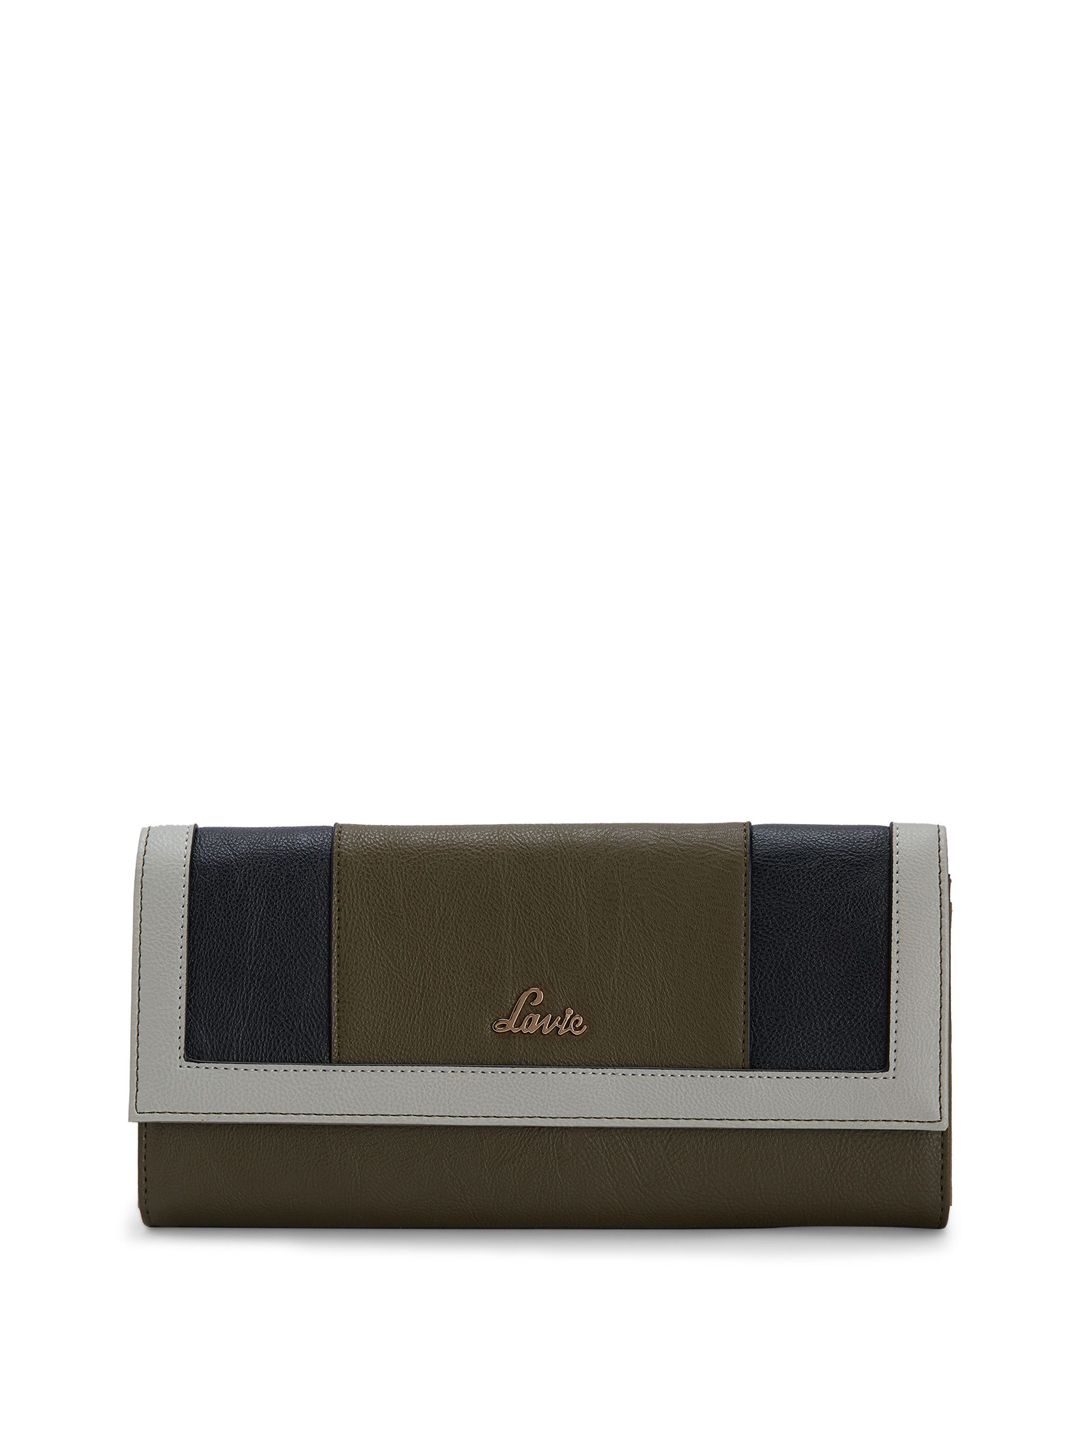 Lavie Women Olive Green & Navy Blue Colourblocked Two Fold Wallet Price in India